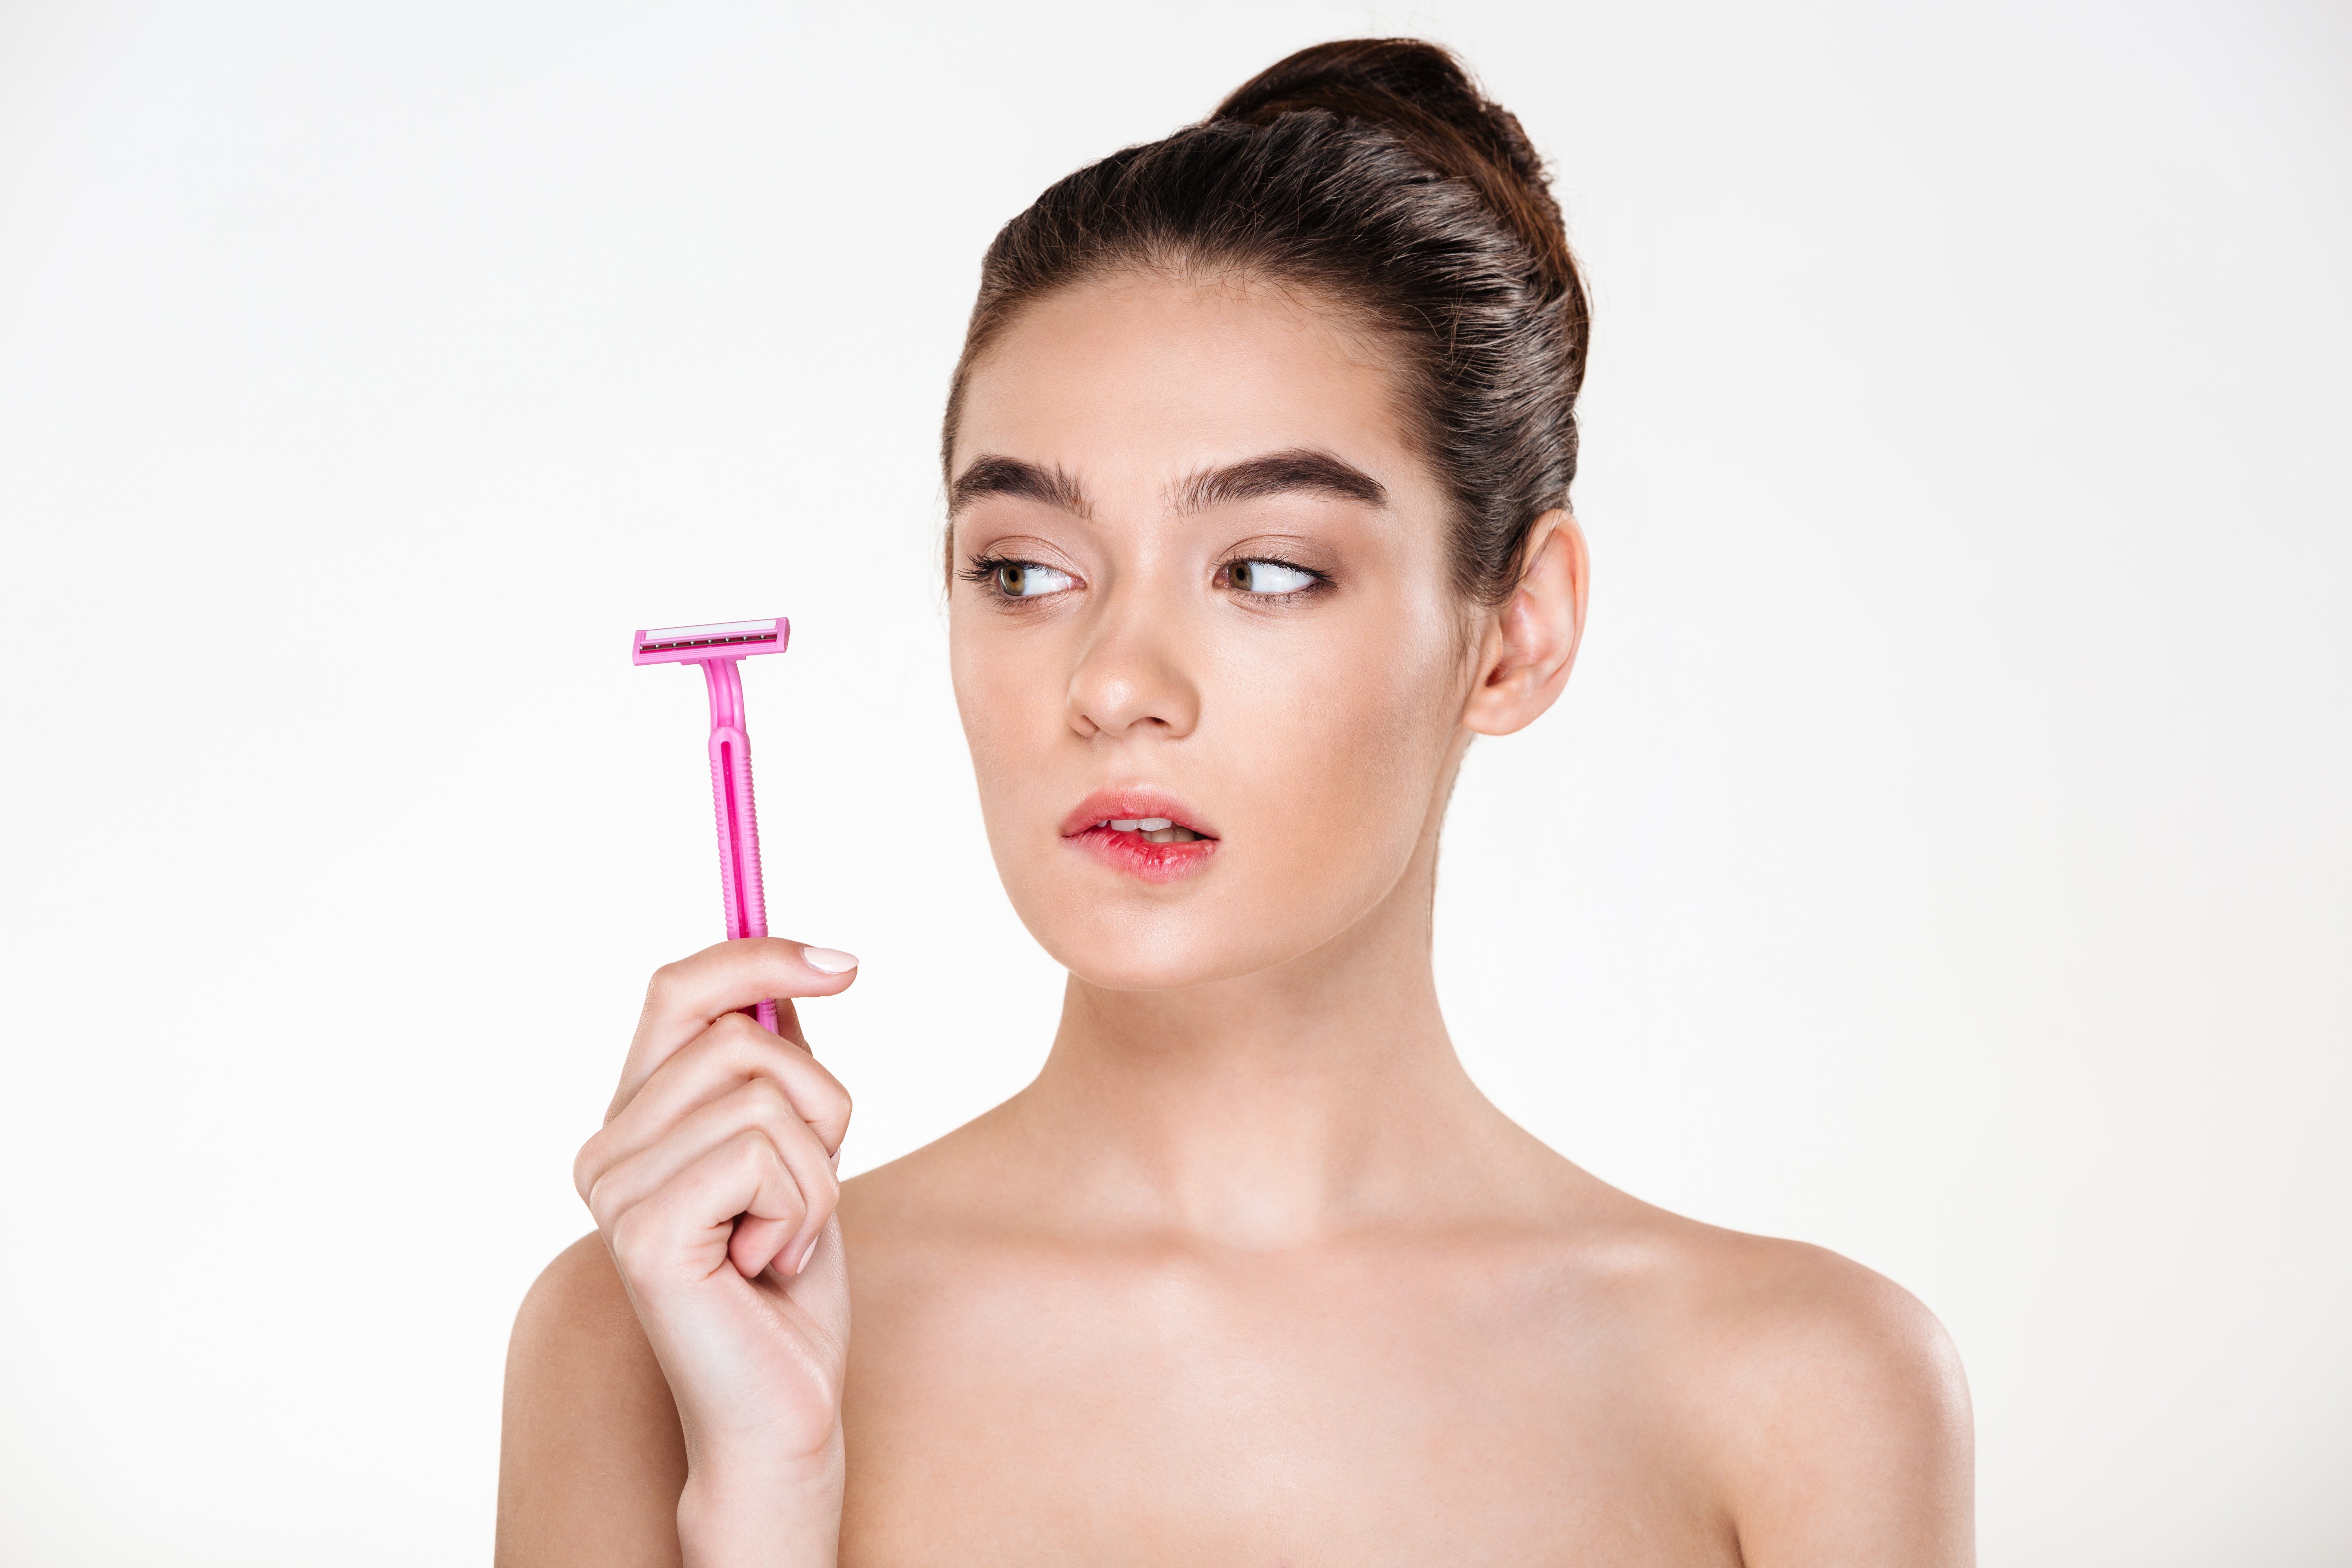 An unhappy woman looking at pink razor in her hand. | Photo: Shutterstock.